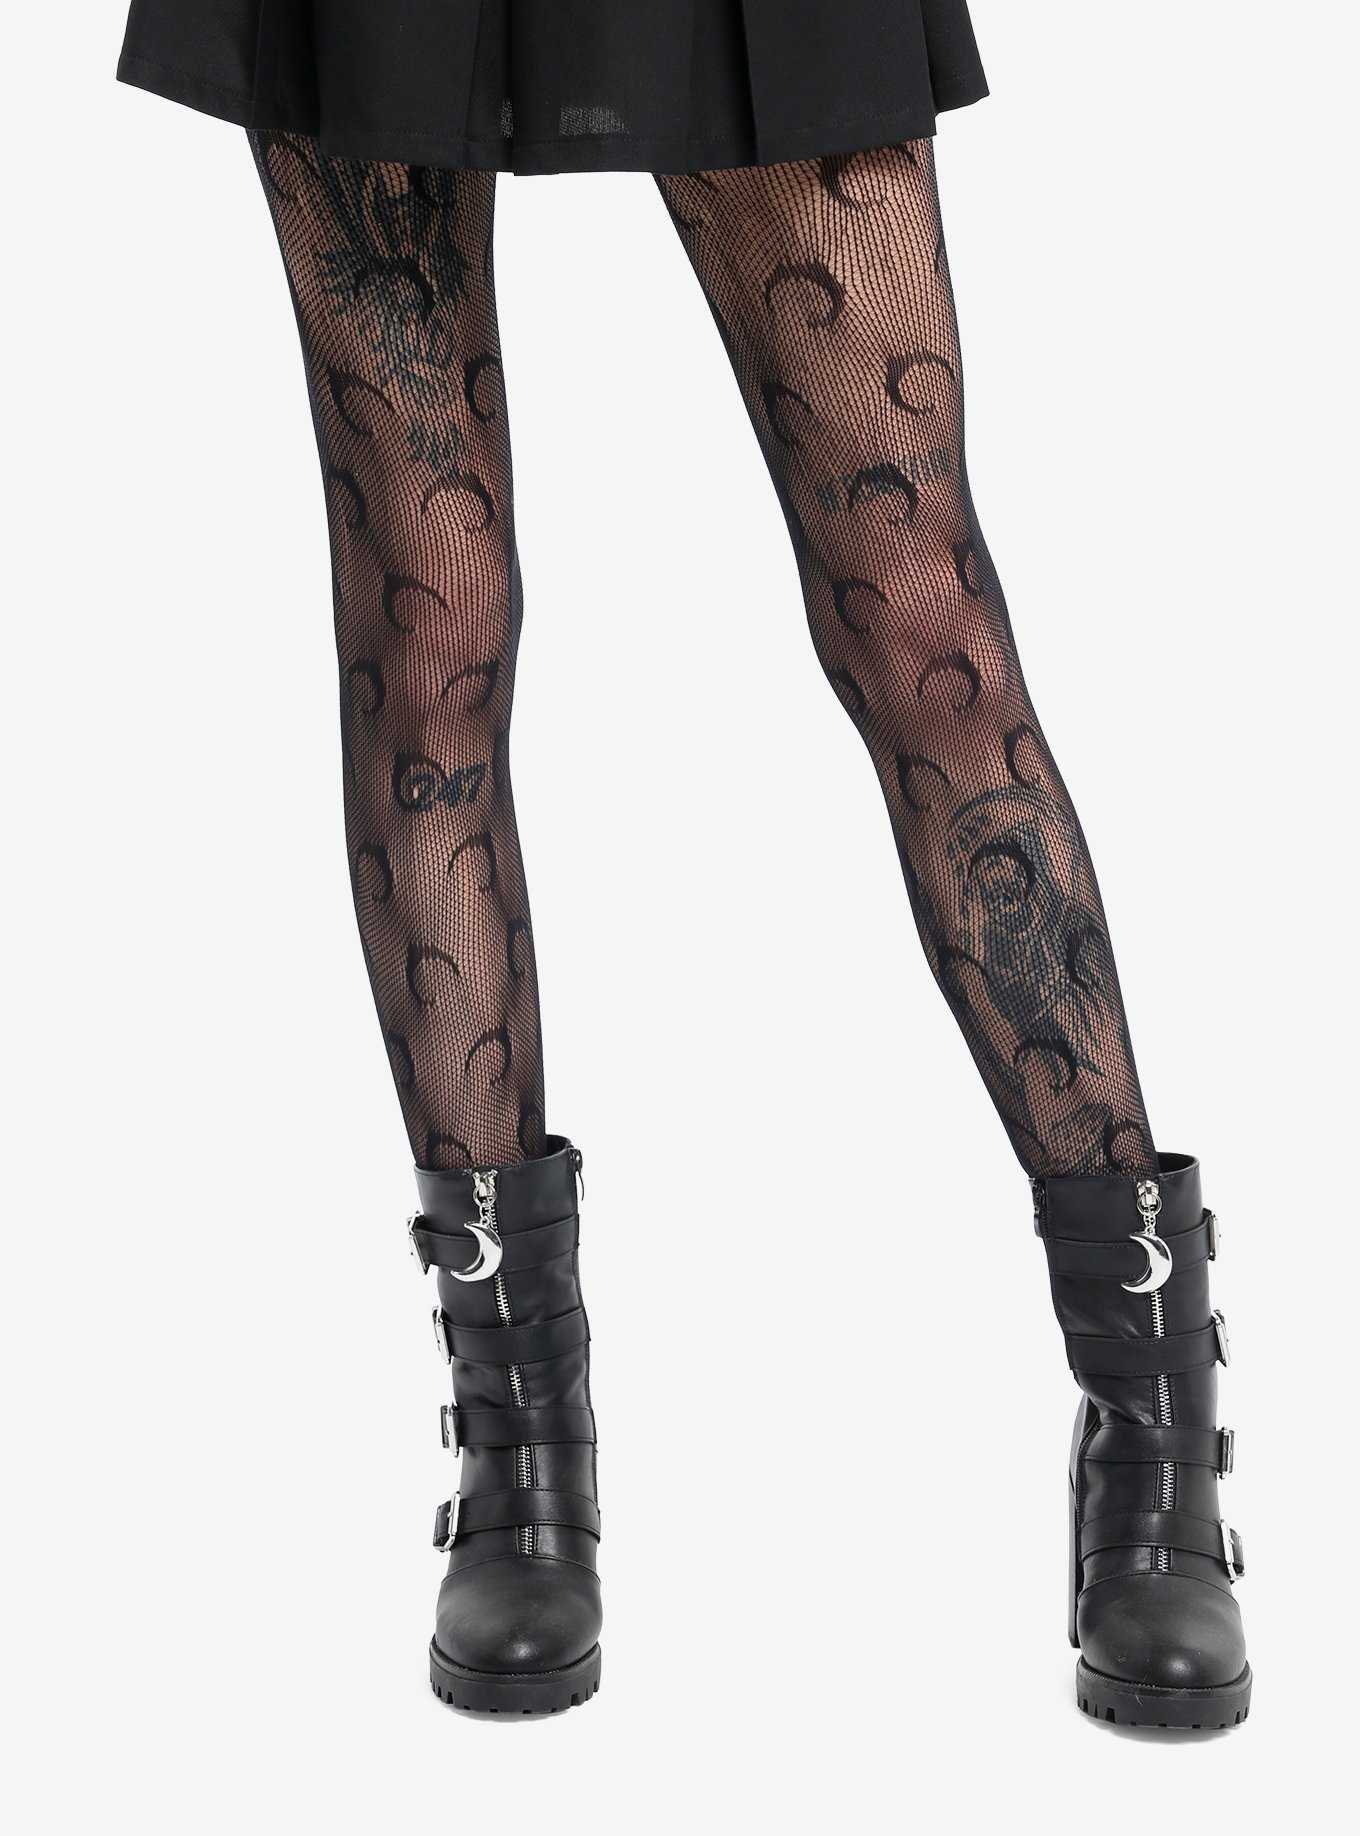 Item of the day: Batman tights from Hot Topic - A Cornish Geek